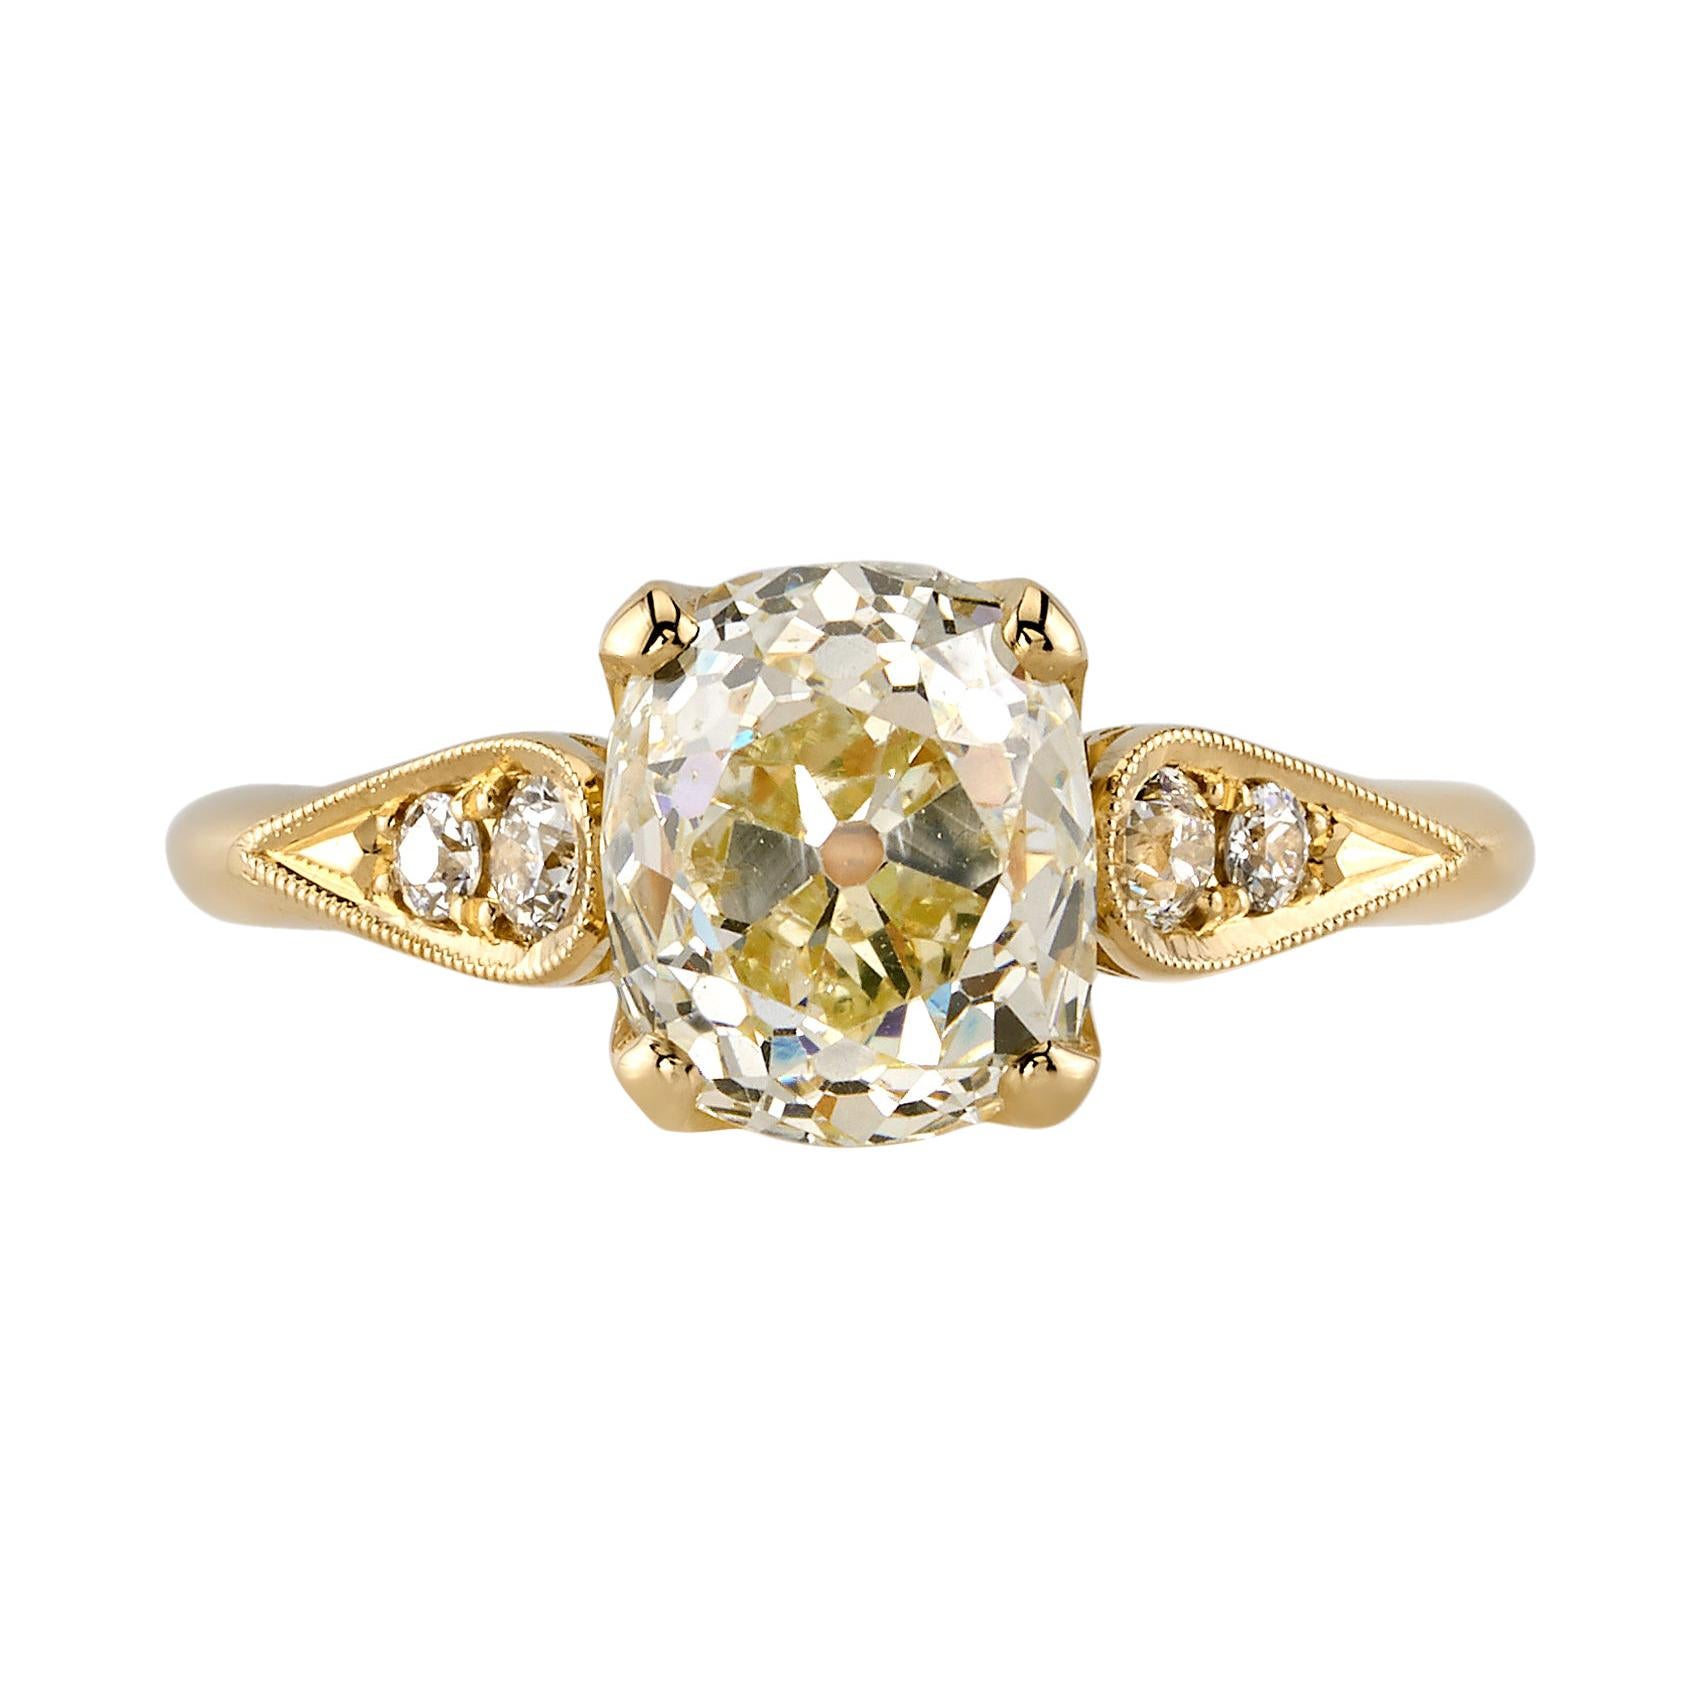 2.20 Carat Cushion Cut Diamond Set in a Handcrafted Yellow Gold Engagement Ring